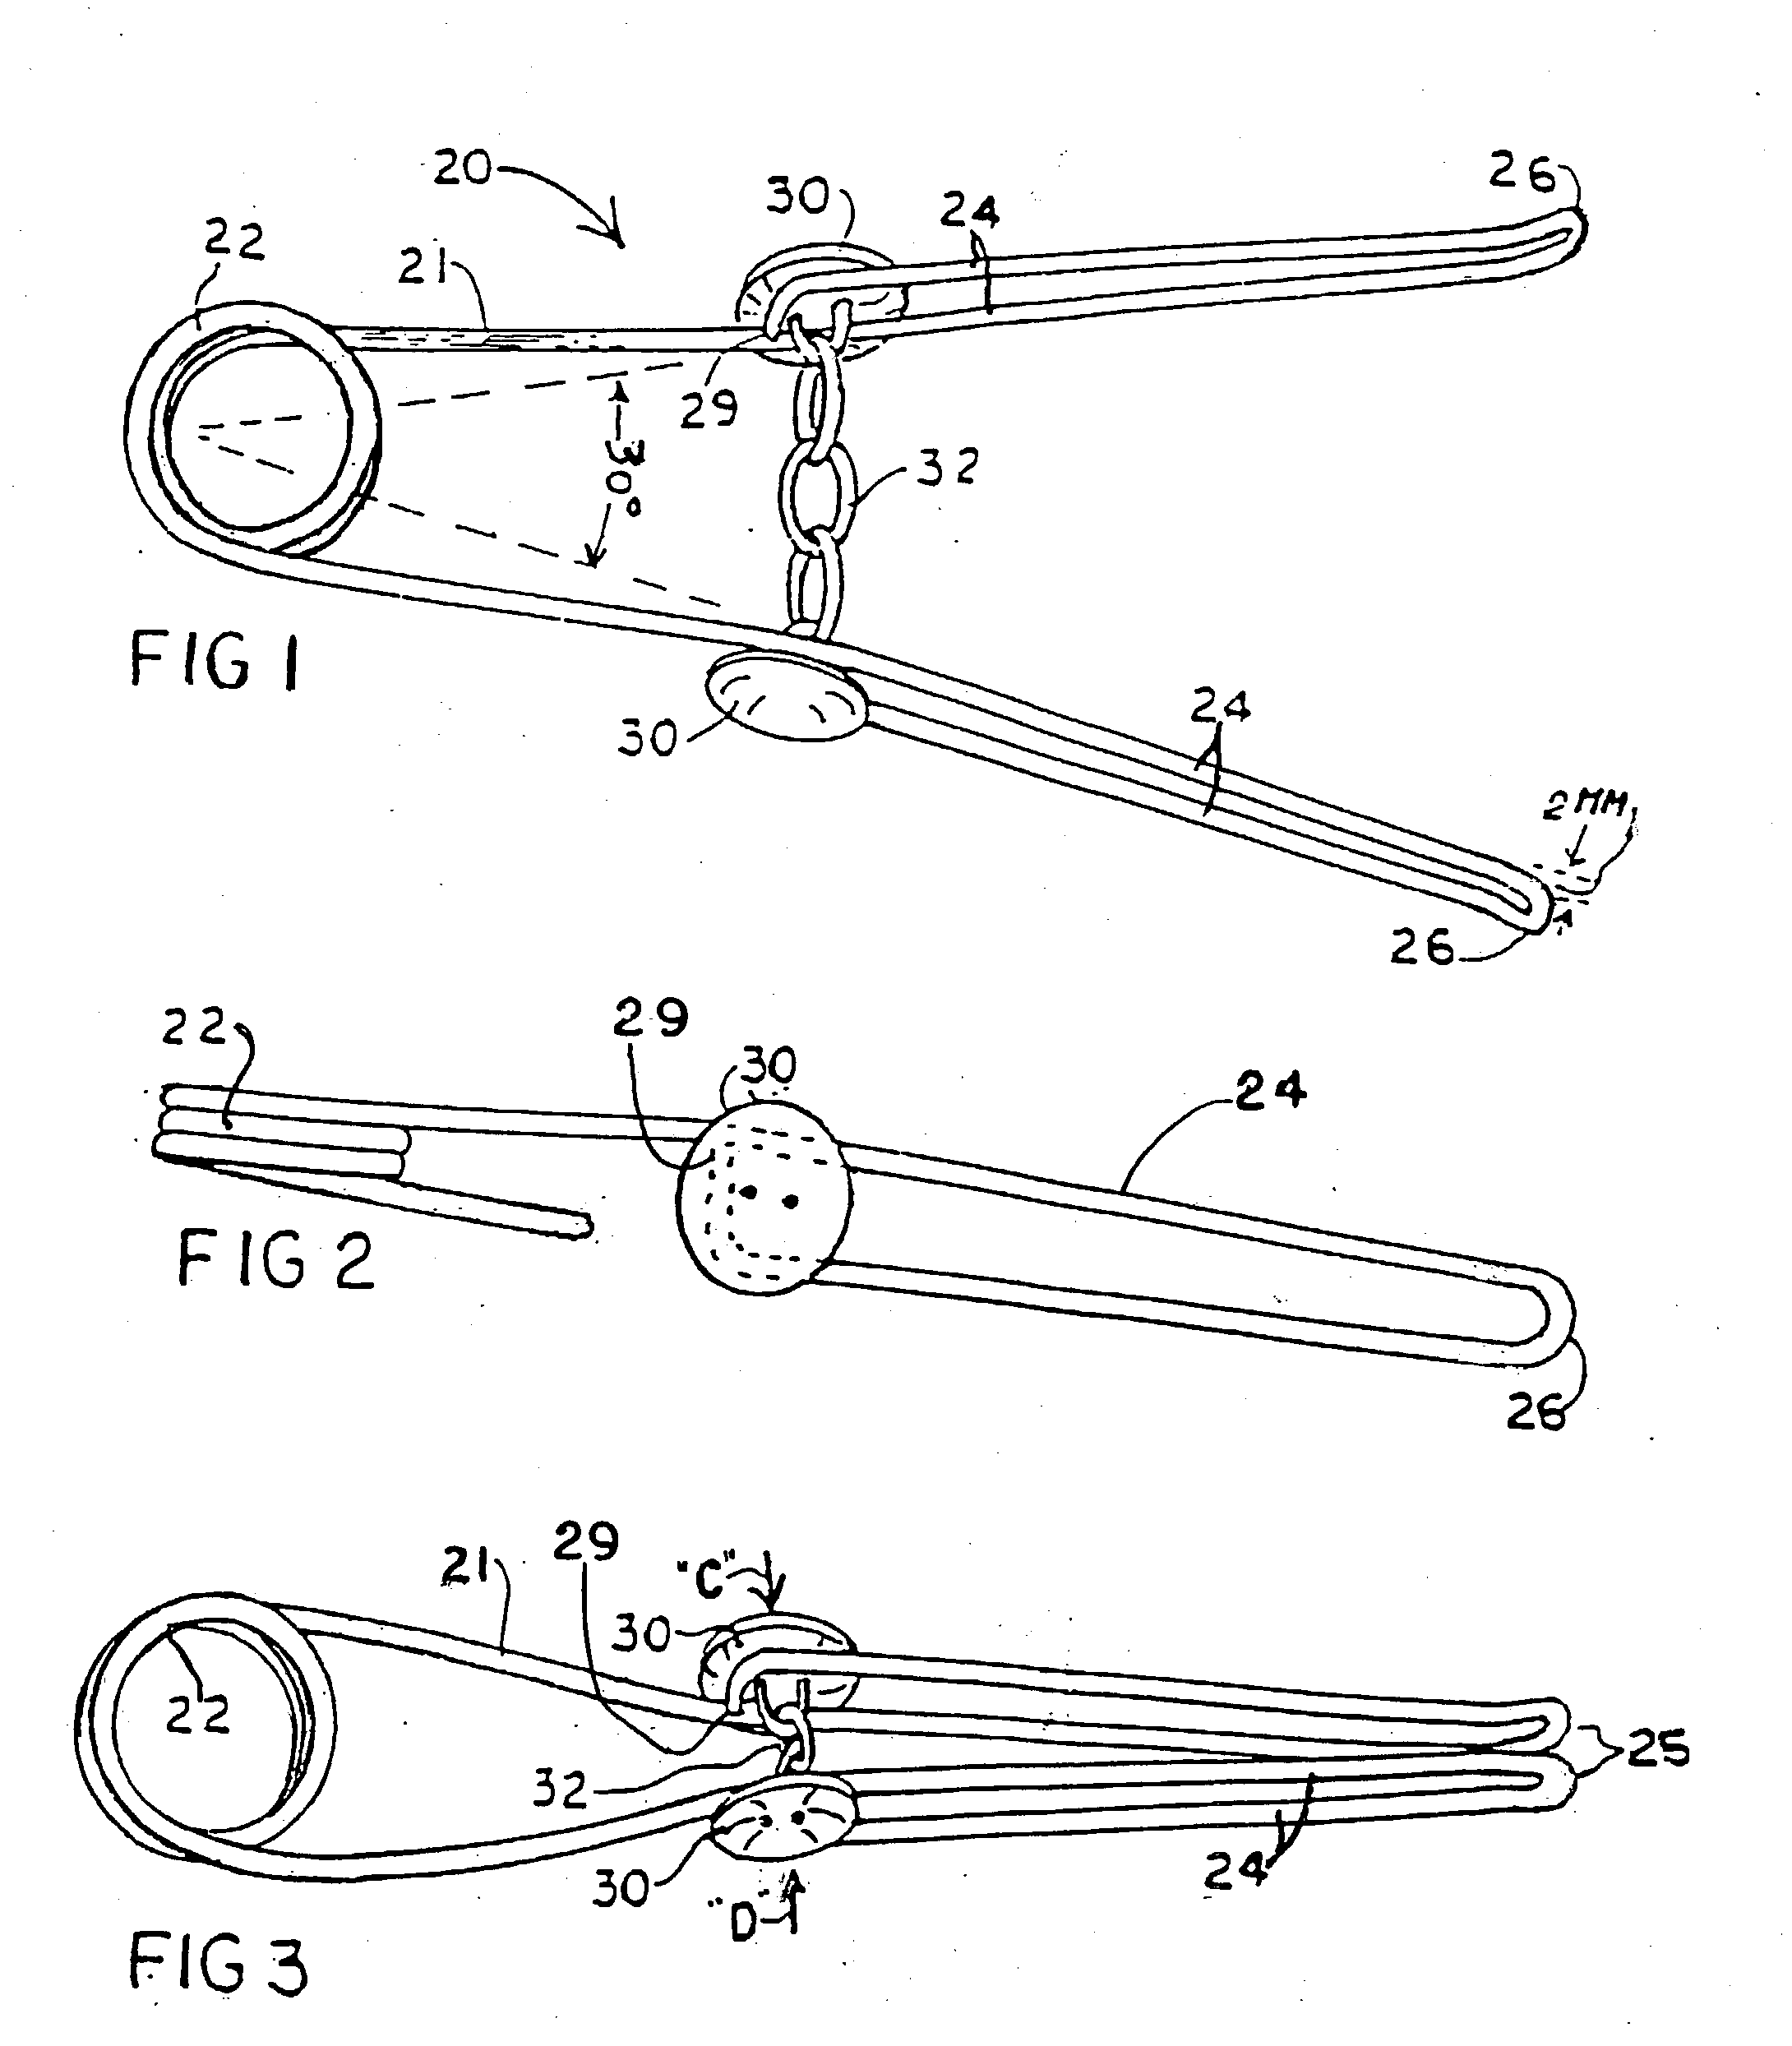 Method and apparatus for preparing and fitting condom catheters